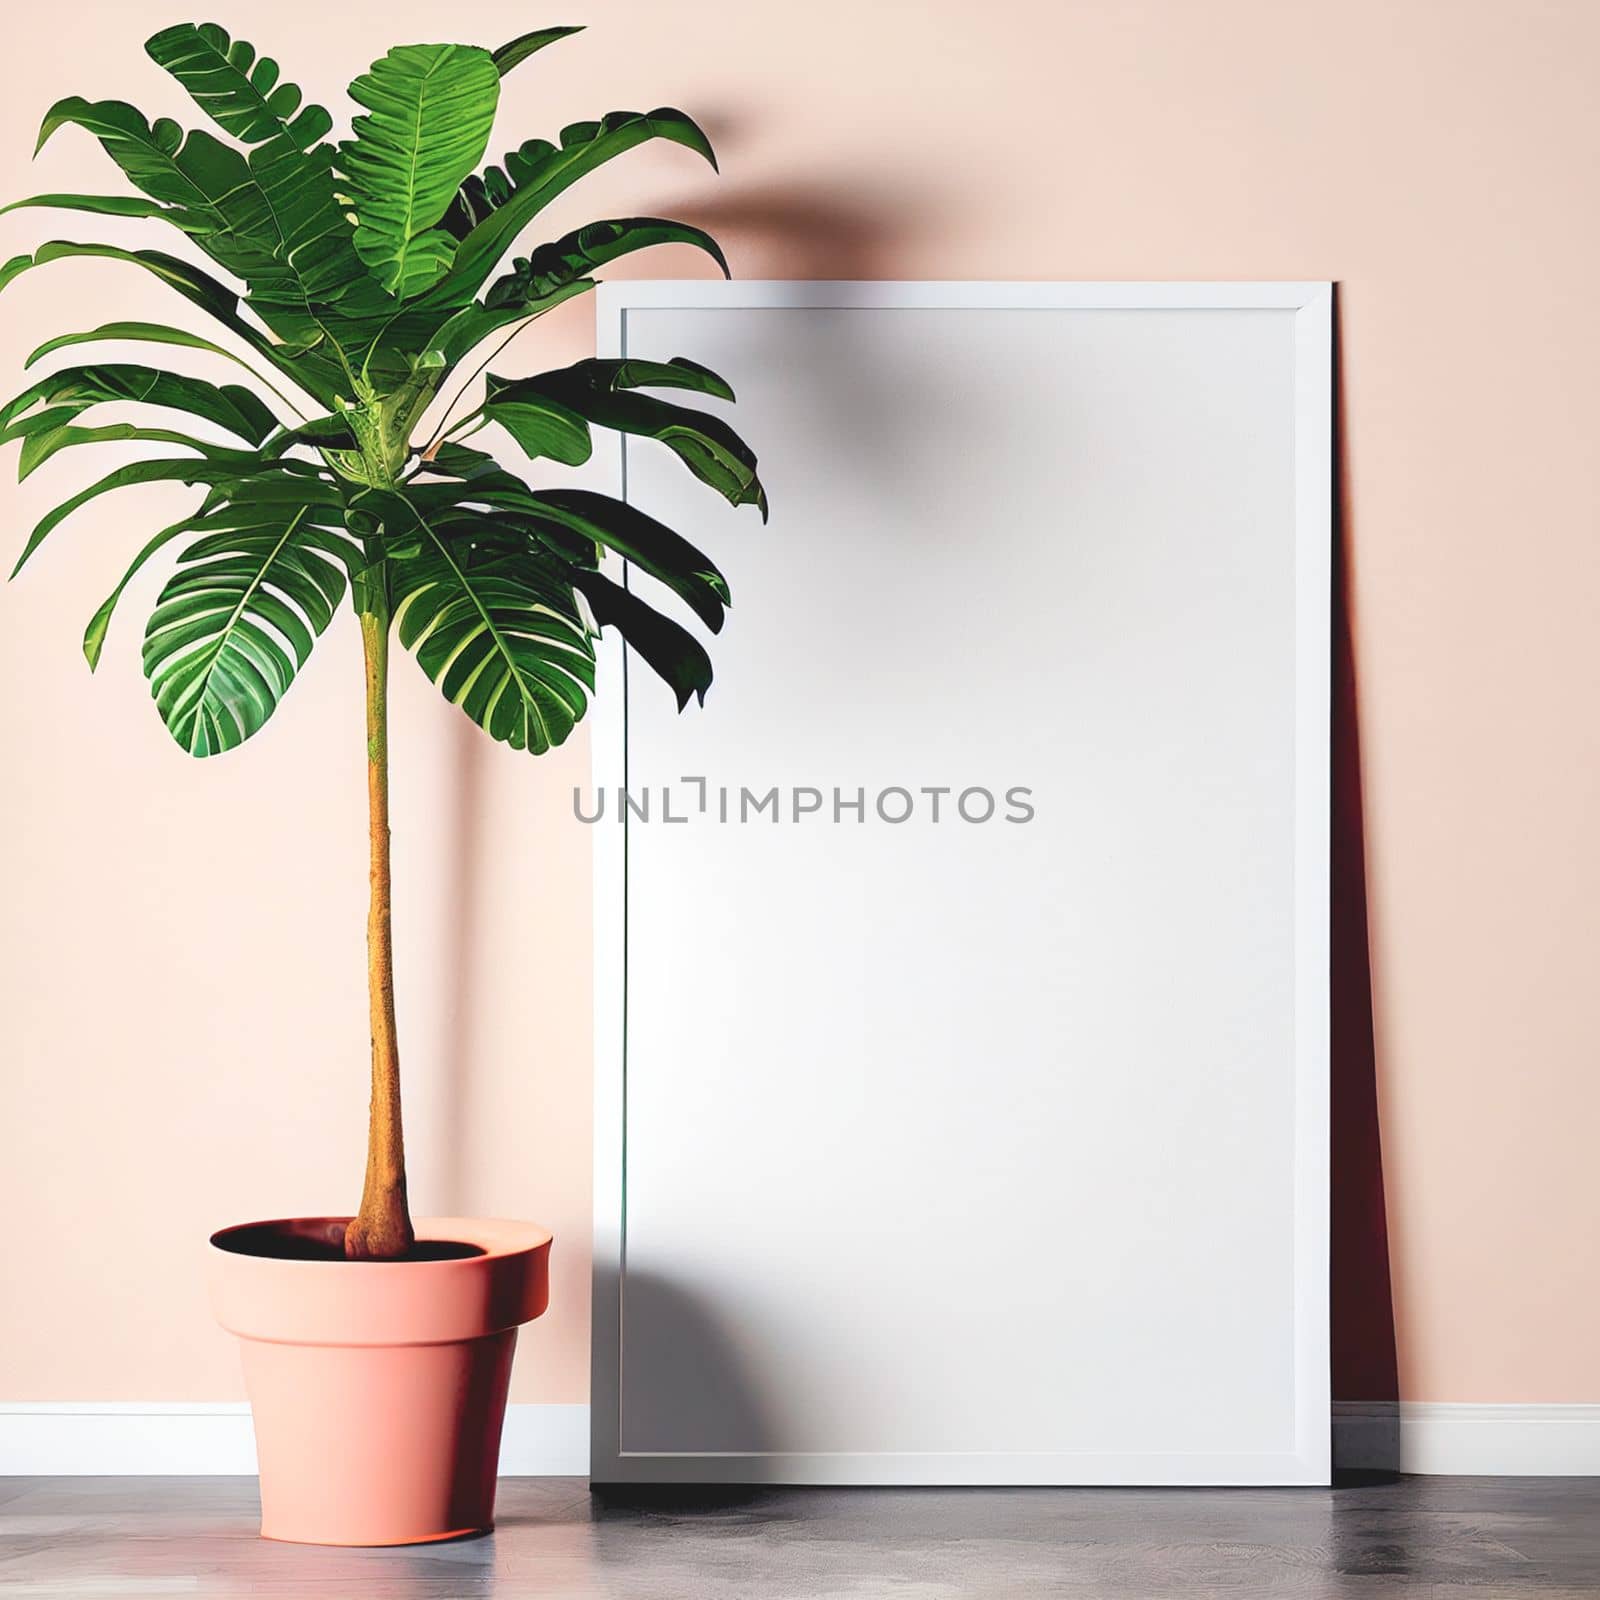 Mockup of empty frame displayed inside room interior with pastel wall background and plant pot nearby. 3D Rendering